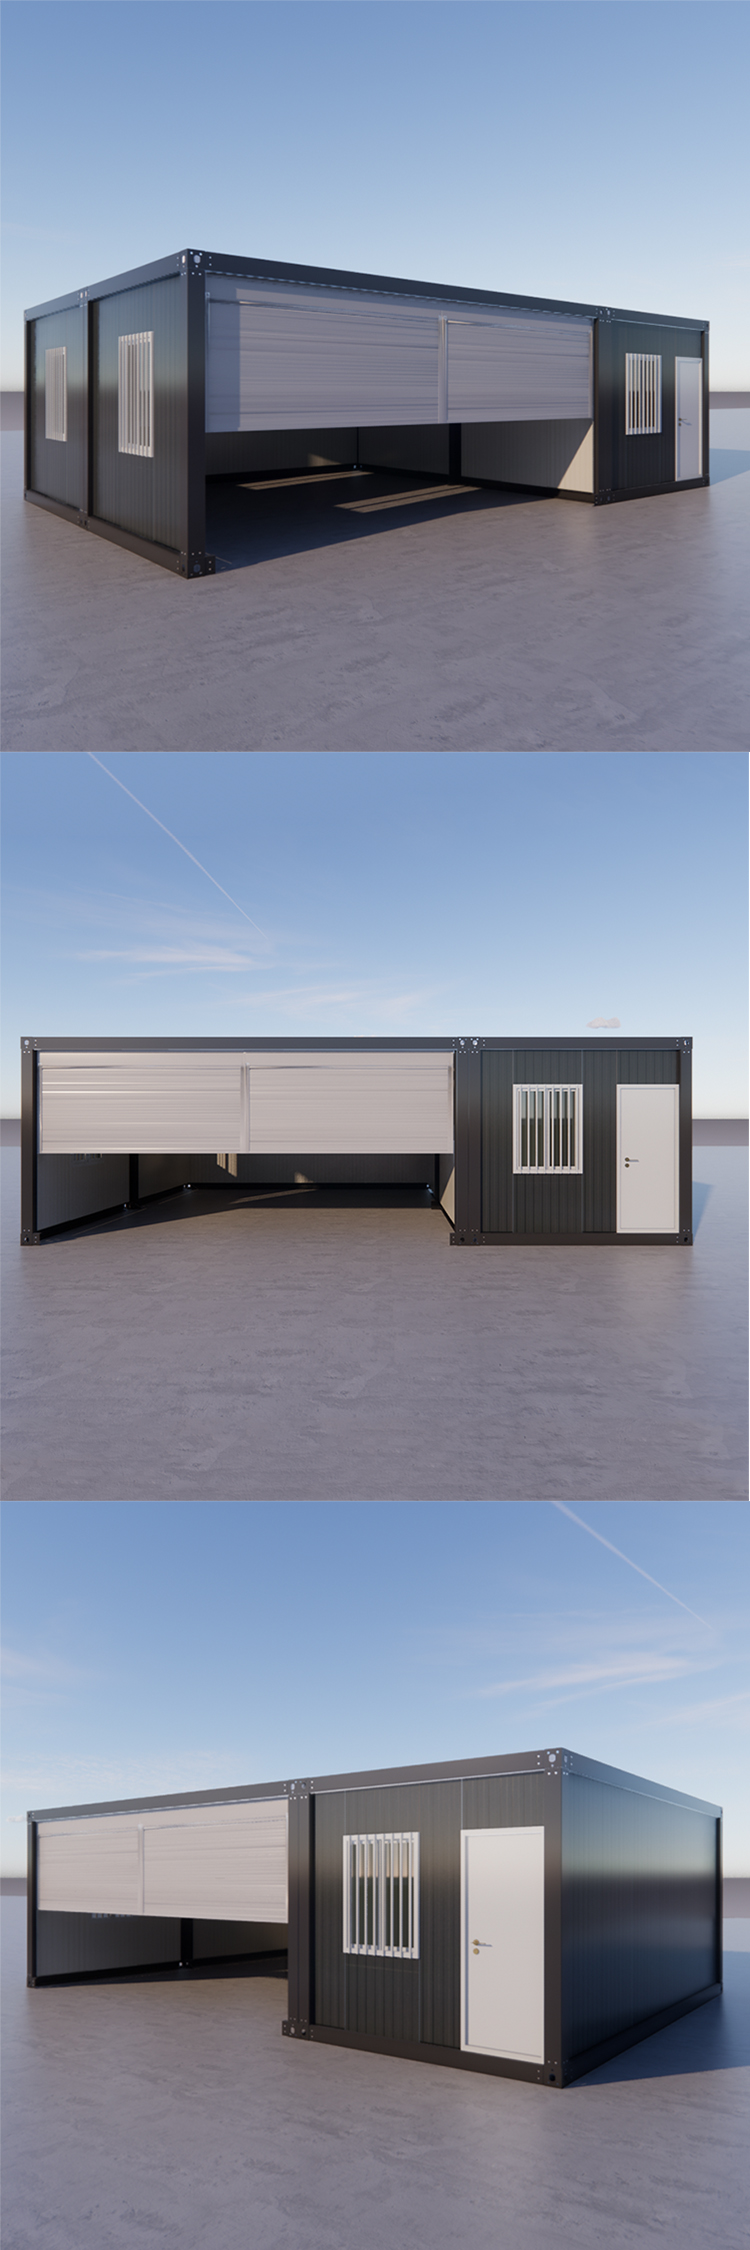 container home office